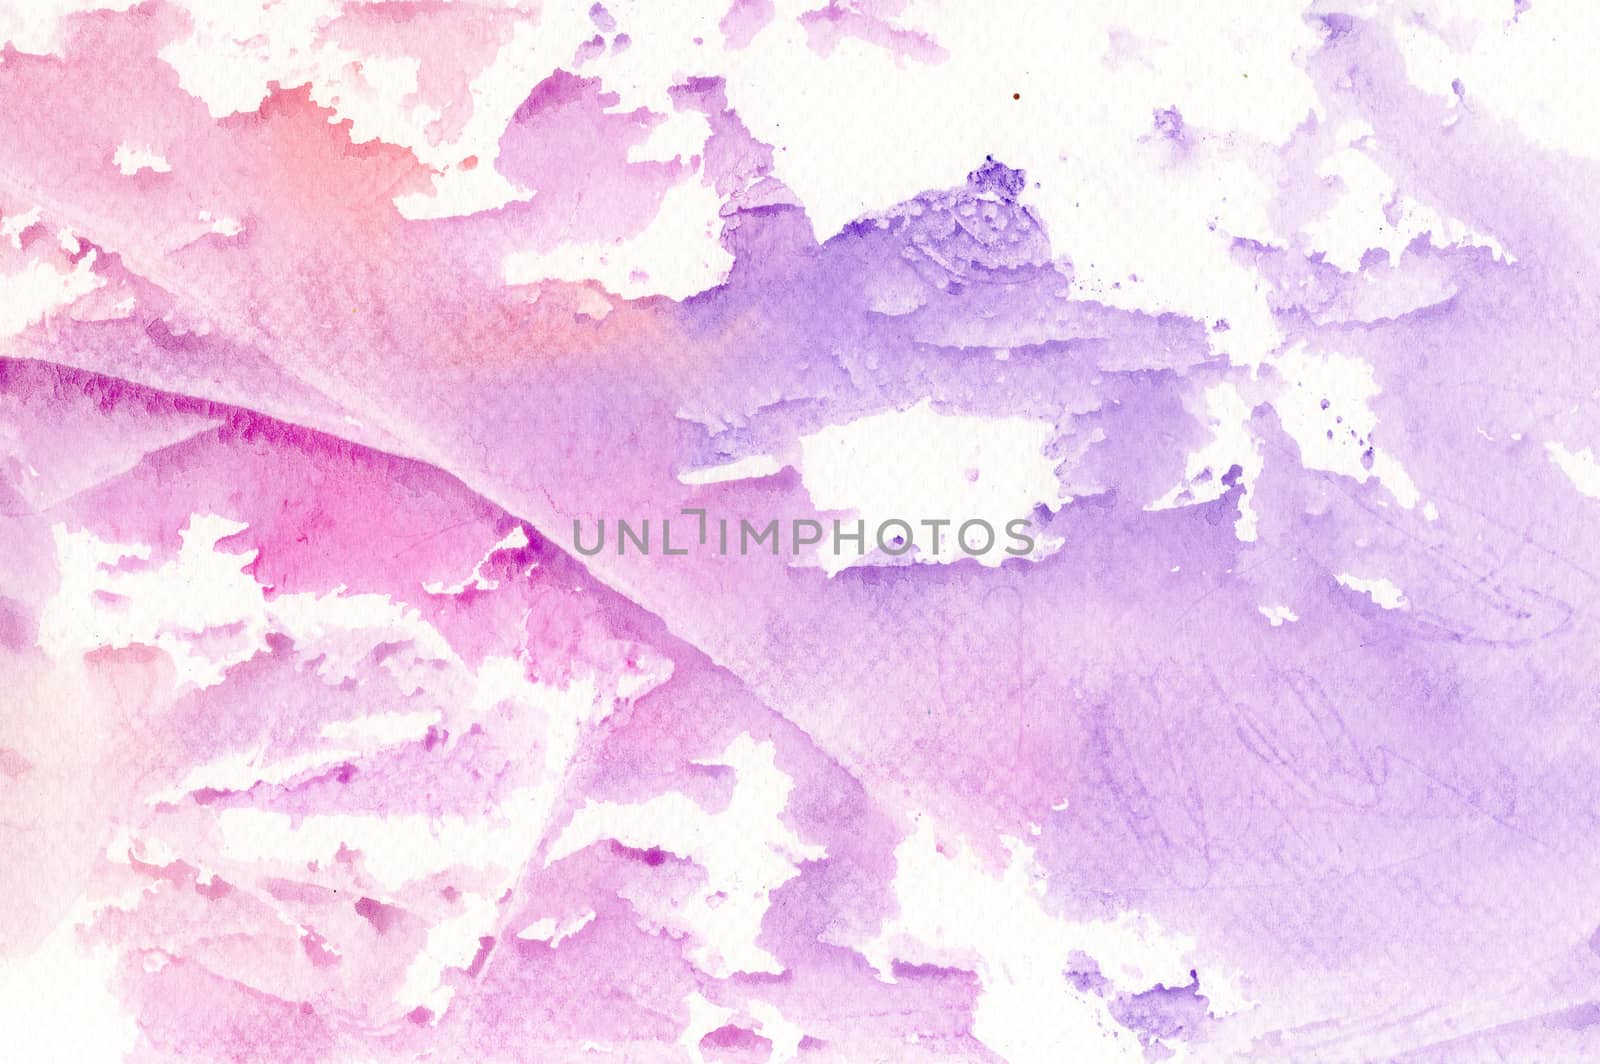 Abstract background of watercolor on paper texture by cuckoo_111